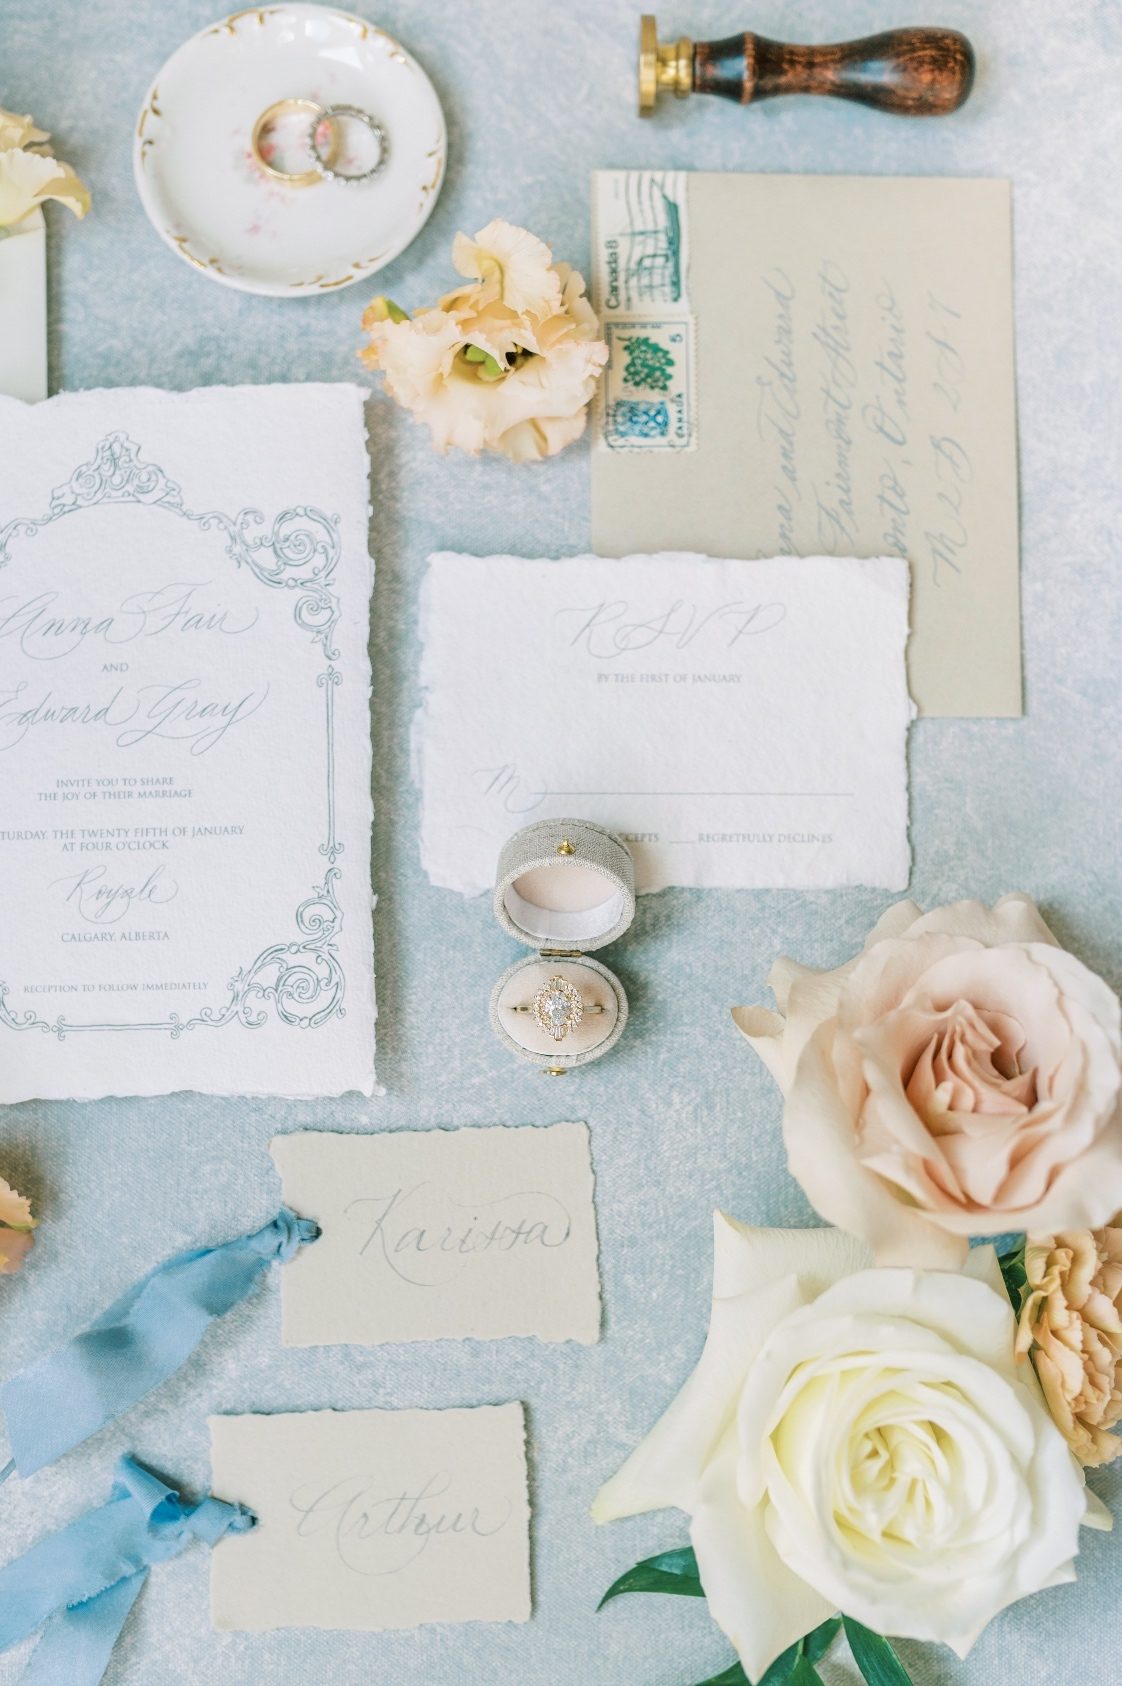 A flat lay shot of the stationary and ring accented by peach, blush and white flowers